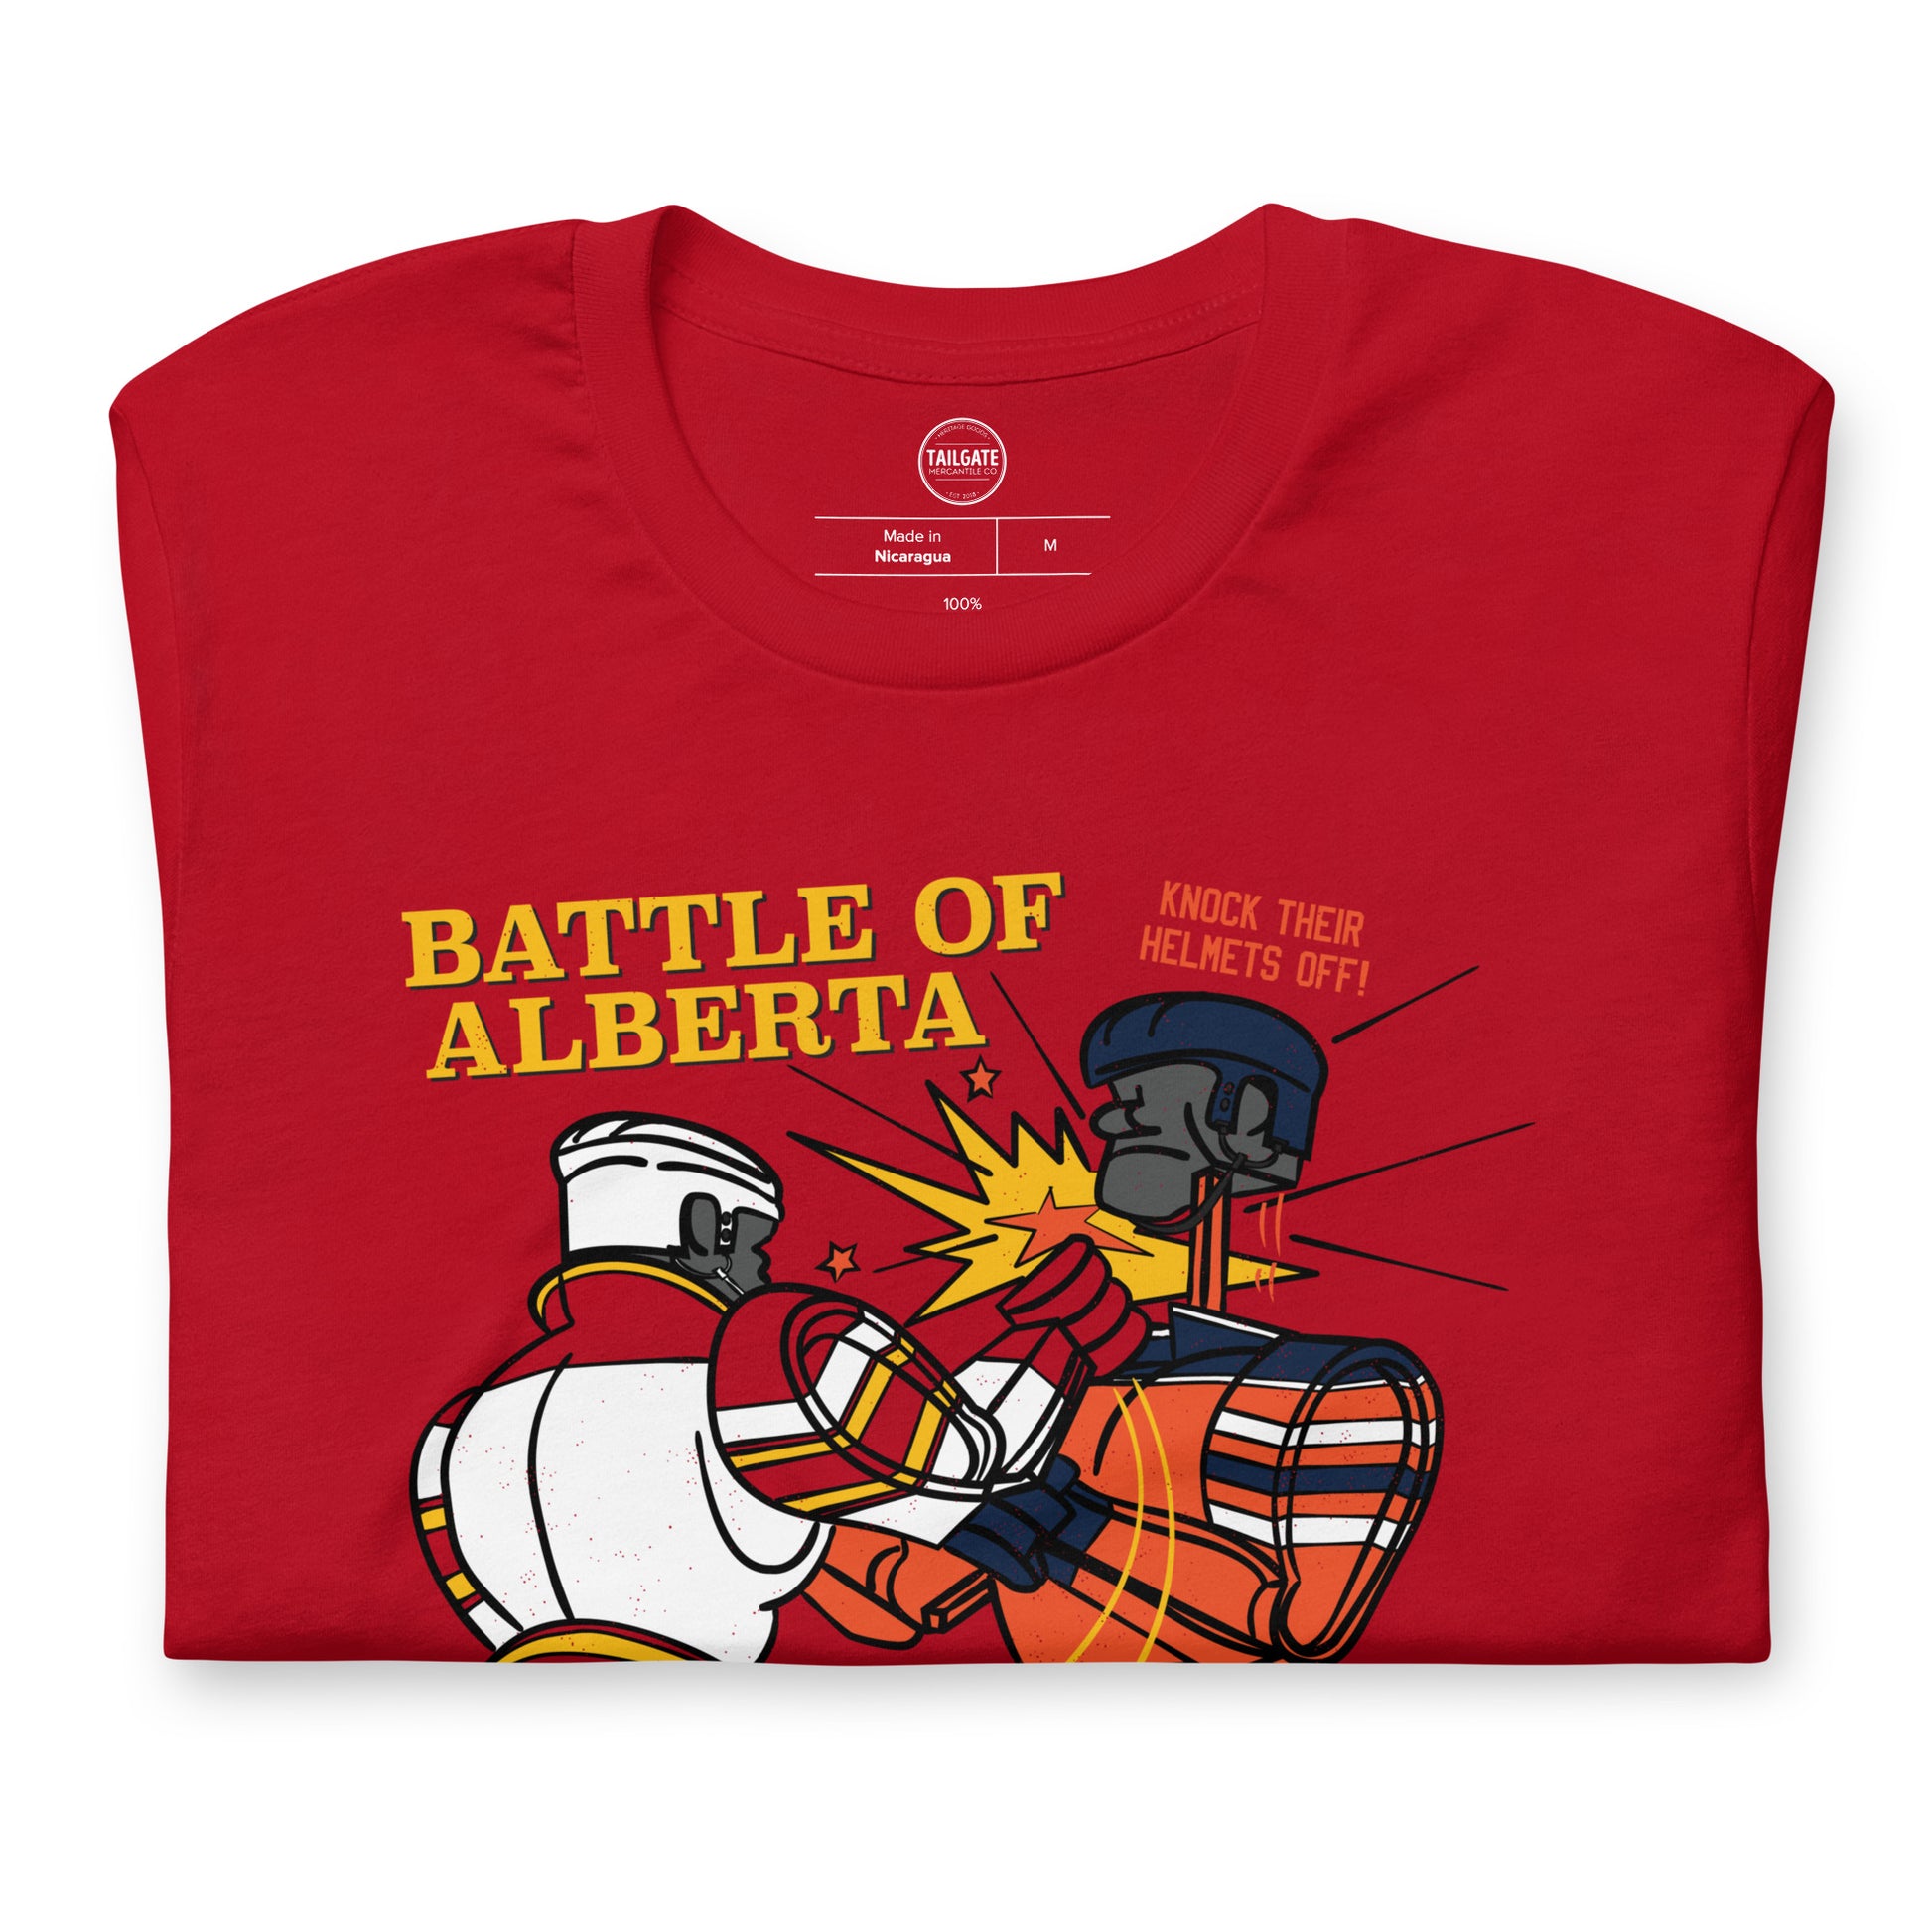 Close up image of red t-shirt with design of "Battle of Alberta" with rock'em, sock'em style hockey players fighting located on centre chest. Players in the design are completed in NHL Calgary Flames and Edmonton Oilers colours. This design is exclusive to Tailgate Mercantile and available only online.